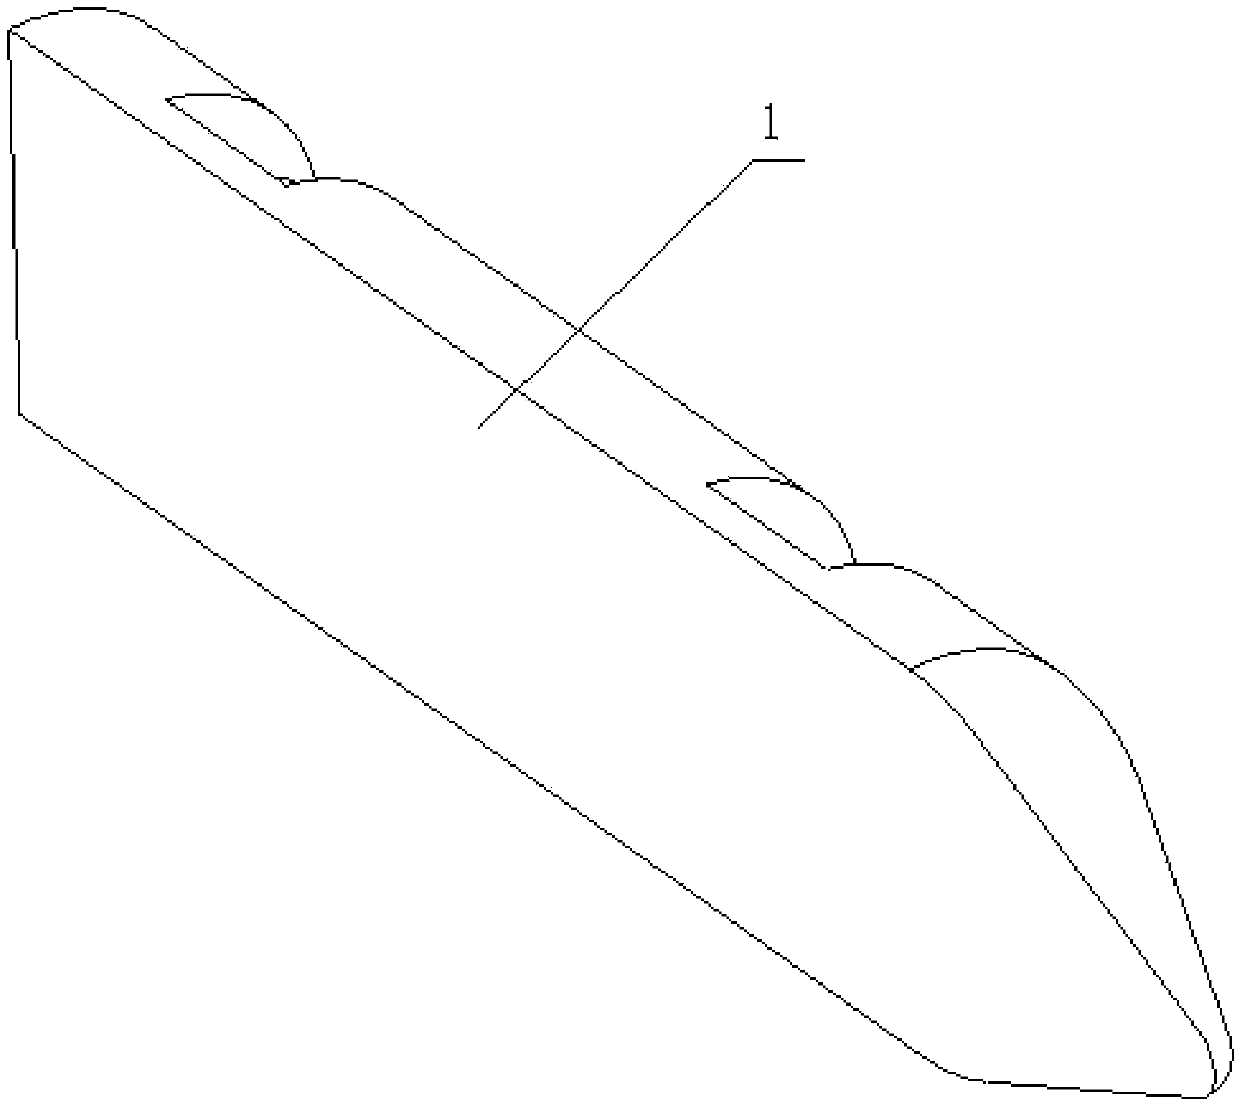 Winglet device with adjustable angle